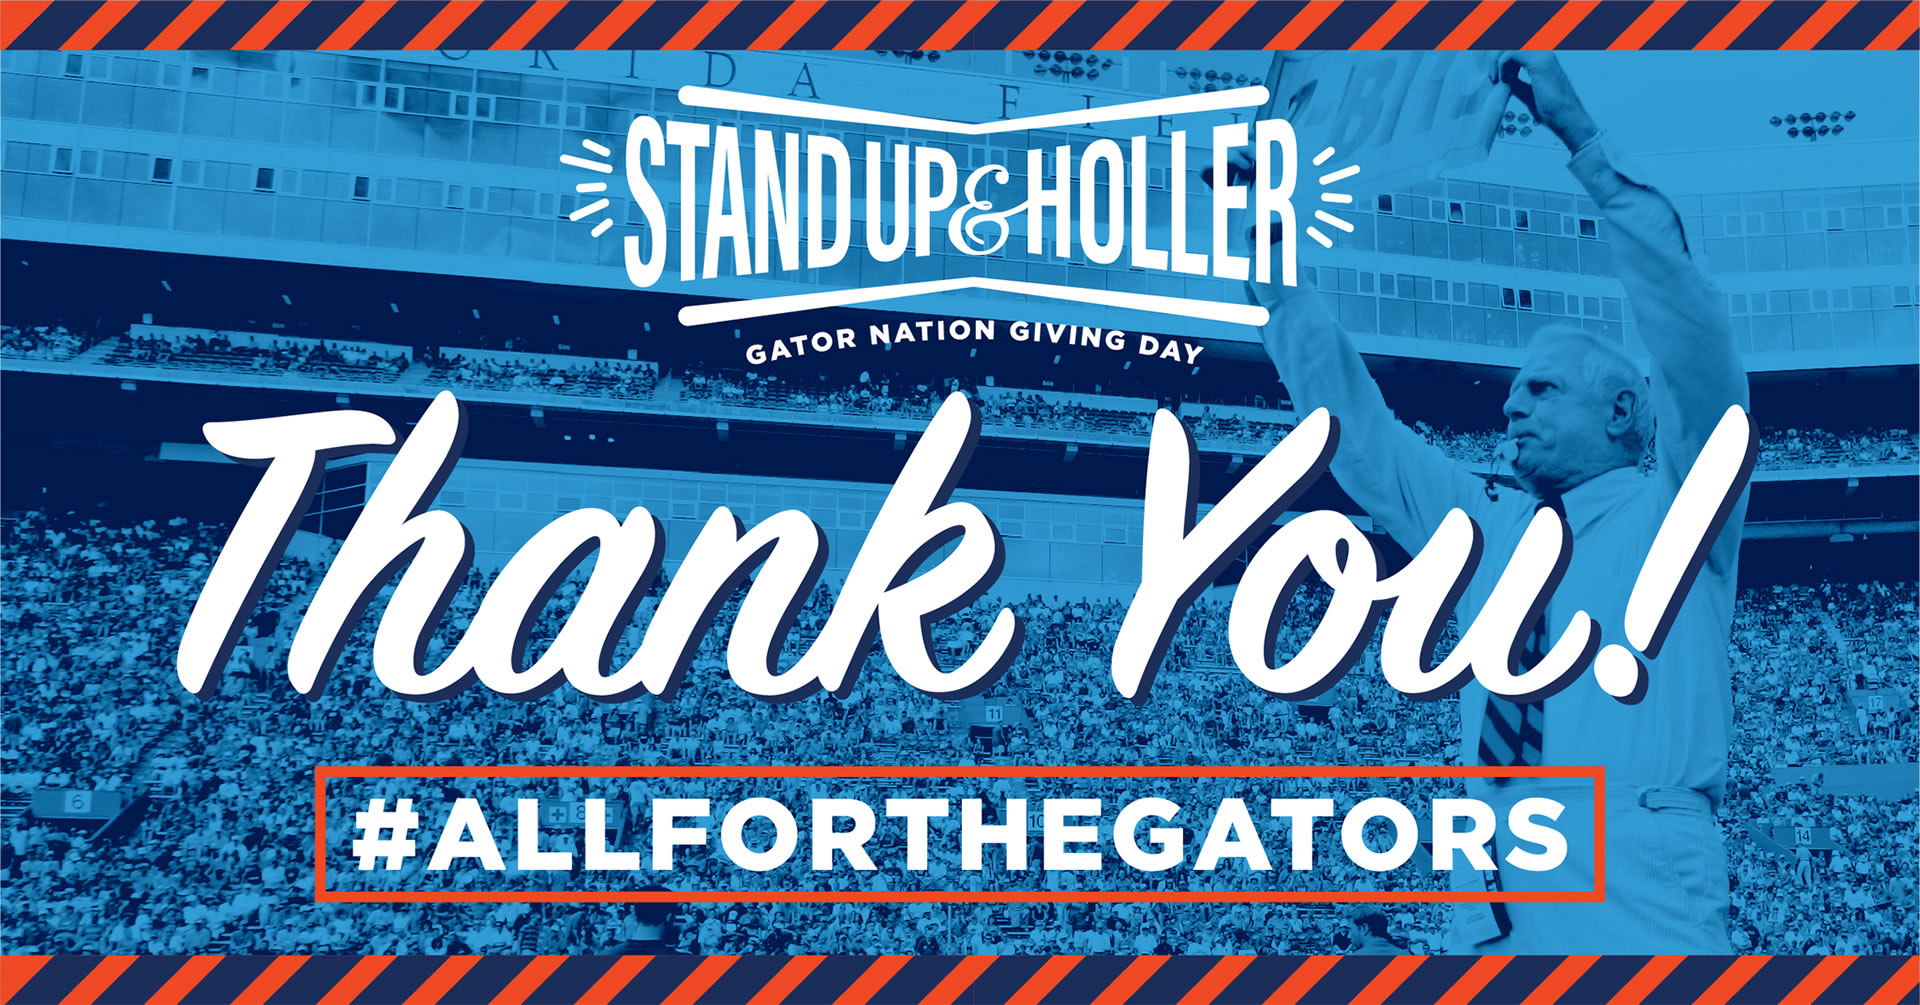 That's a Wrap: 2020 Gator Nation Giving Day